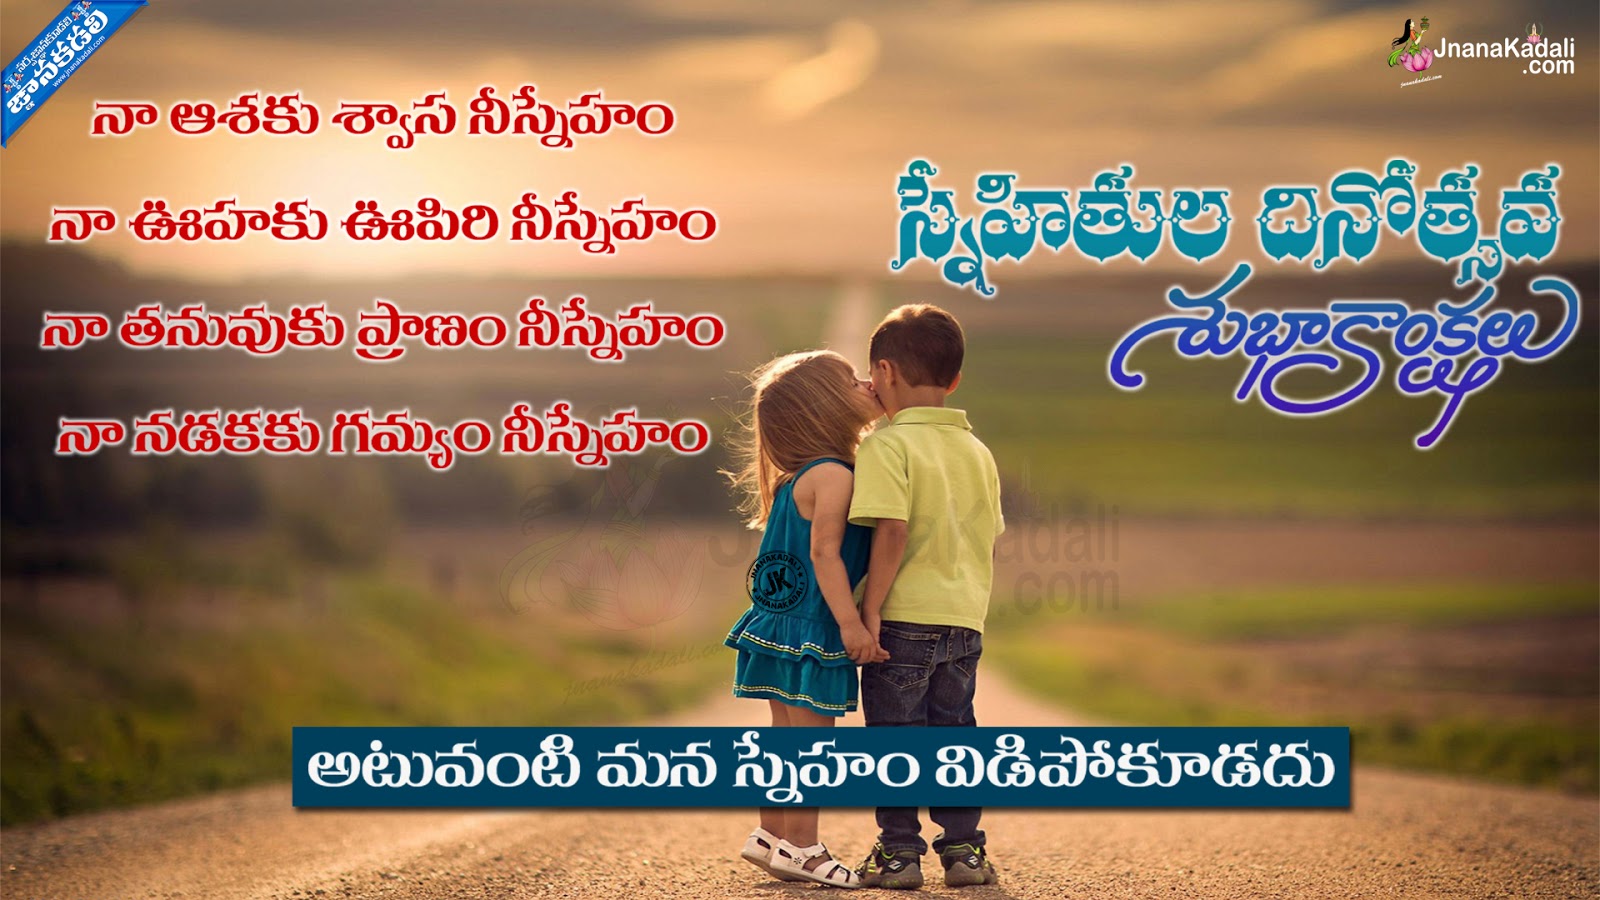 Friendship Day Telugu Quotes Wishes Greetings Images - Gussa Hazrat Ali Quotes - HD Wallpaper 